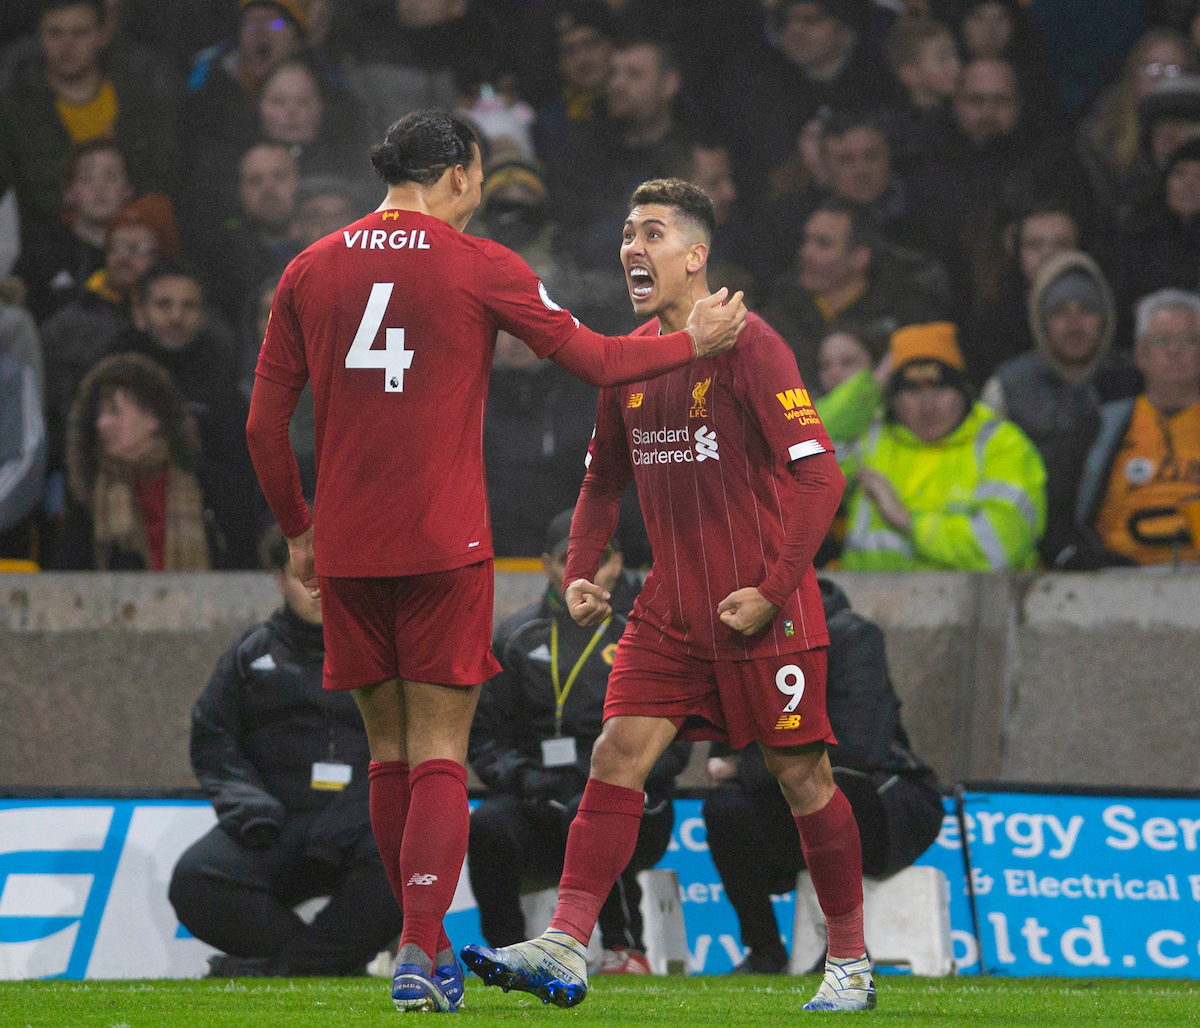 WOLVERHAMPTON, ENGLAND - Thursday, January 23, 2020: Liverpool's Roberto Firmino (R) celebrates scoring the second goal with team-mate Virgil van Dijk during the FA Premier League match between Wolverhampton Wanderers FC and Liverpool FC at Molineux Stadium. (Pic by David Rawcliffe/Propaganda)